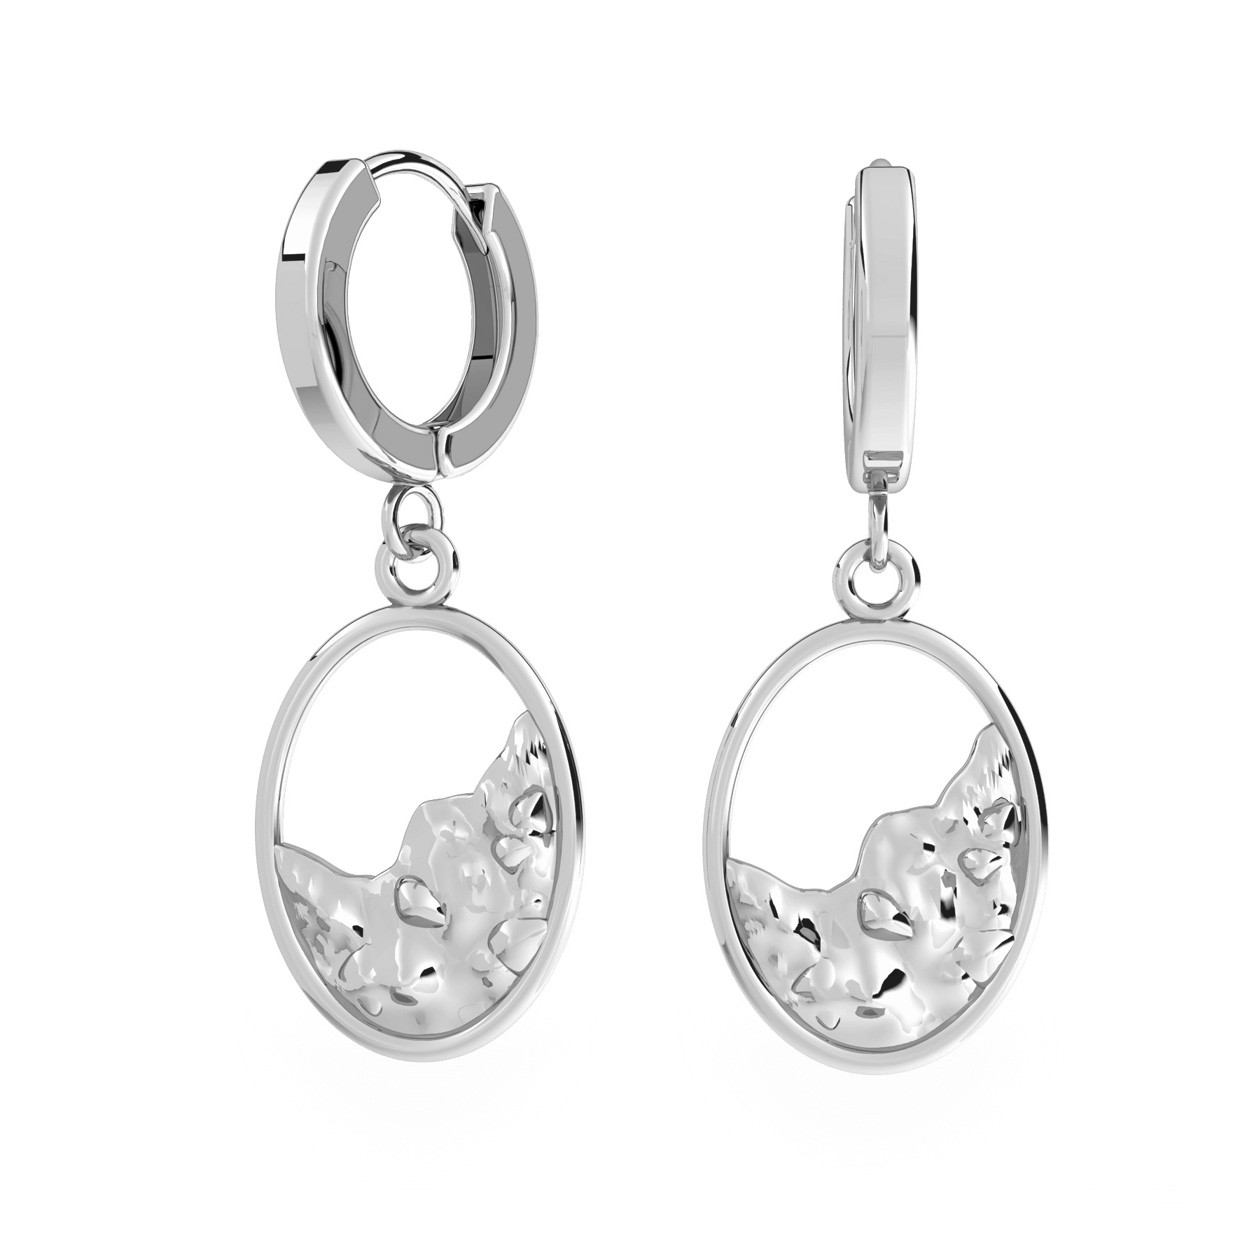 Earrings with decorative ellipse pendant, sterling silver 925